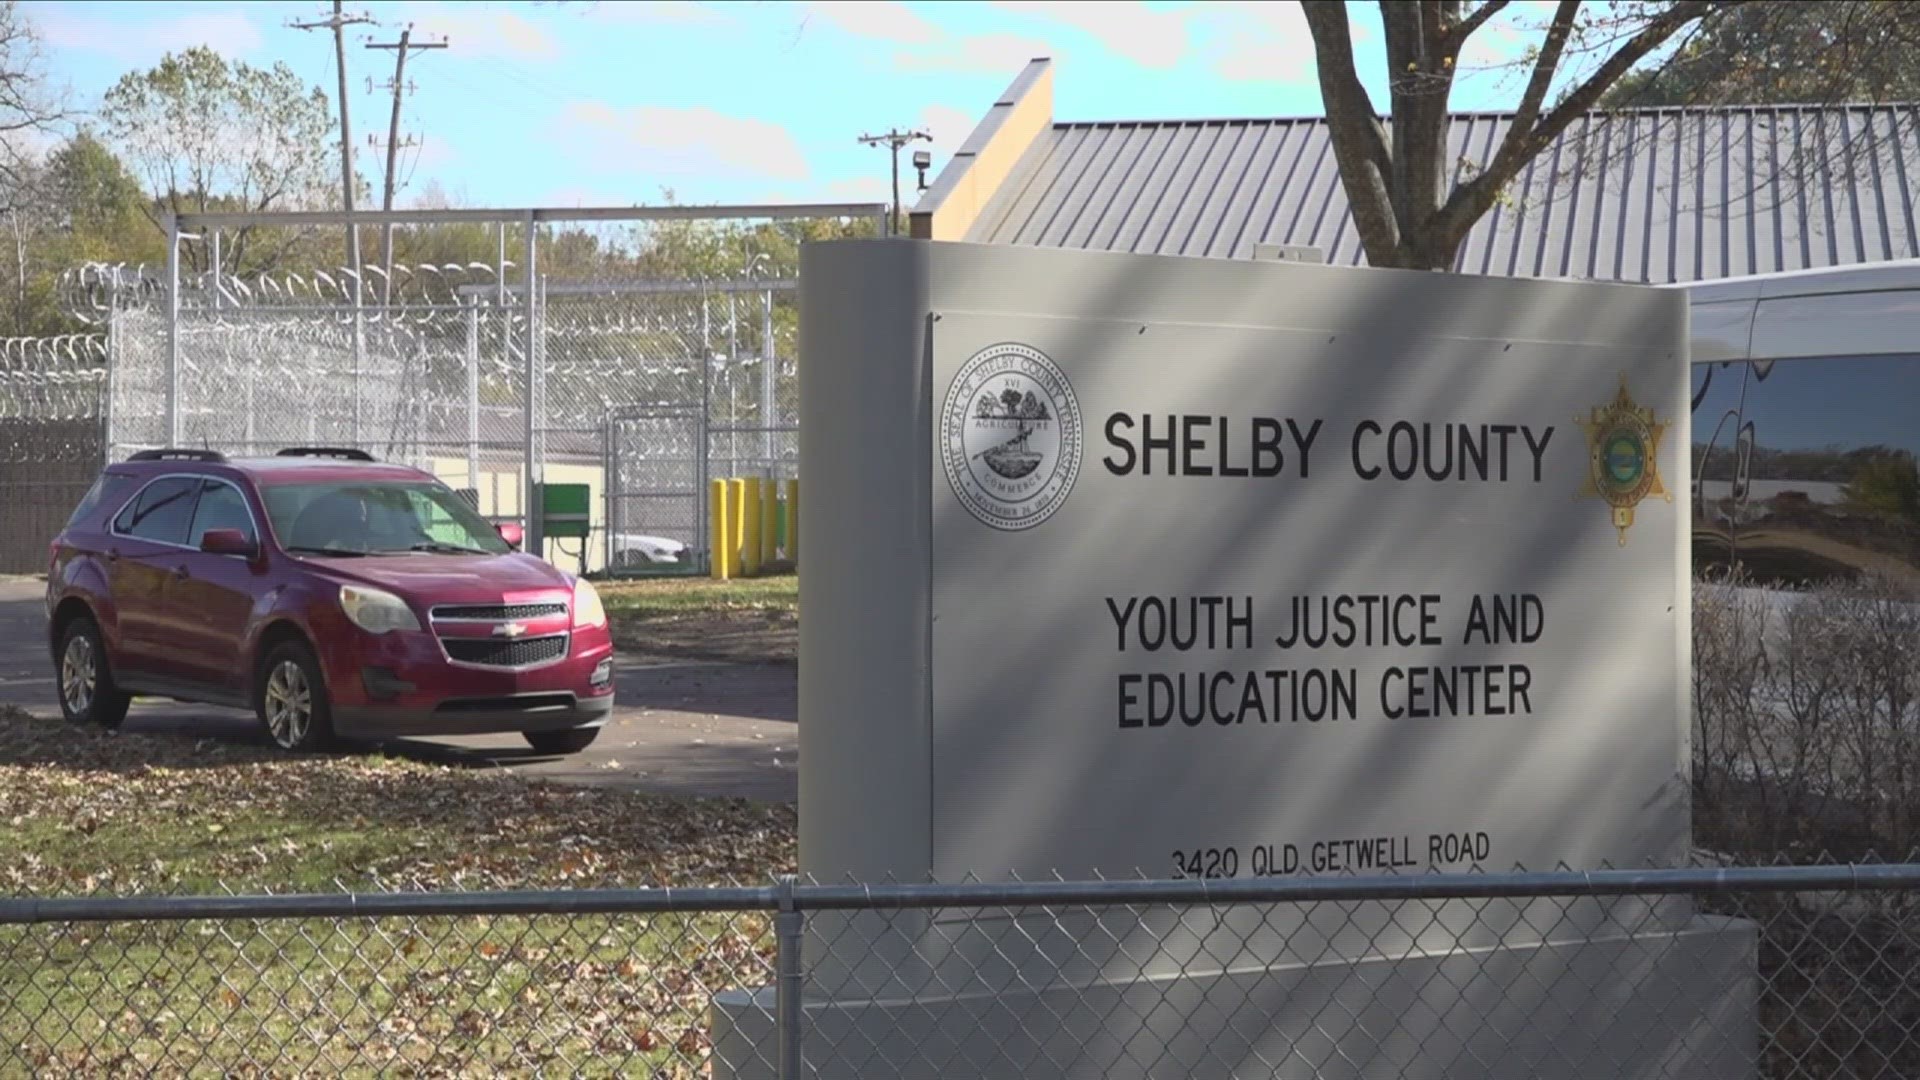 The Shelby County Juvenile Court is collaborating with the SCSO to ensure the long-term welfare of youth and families at the youth justice and education center.